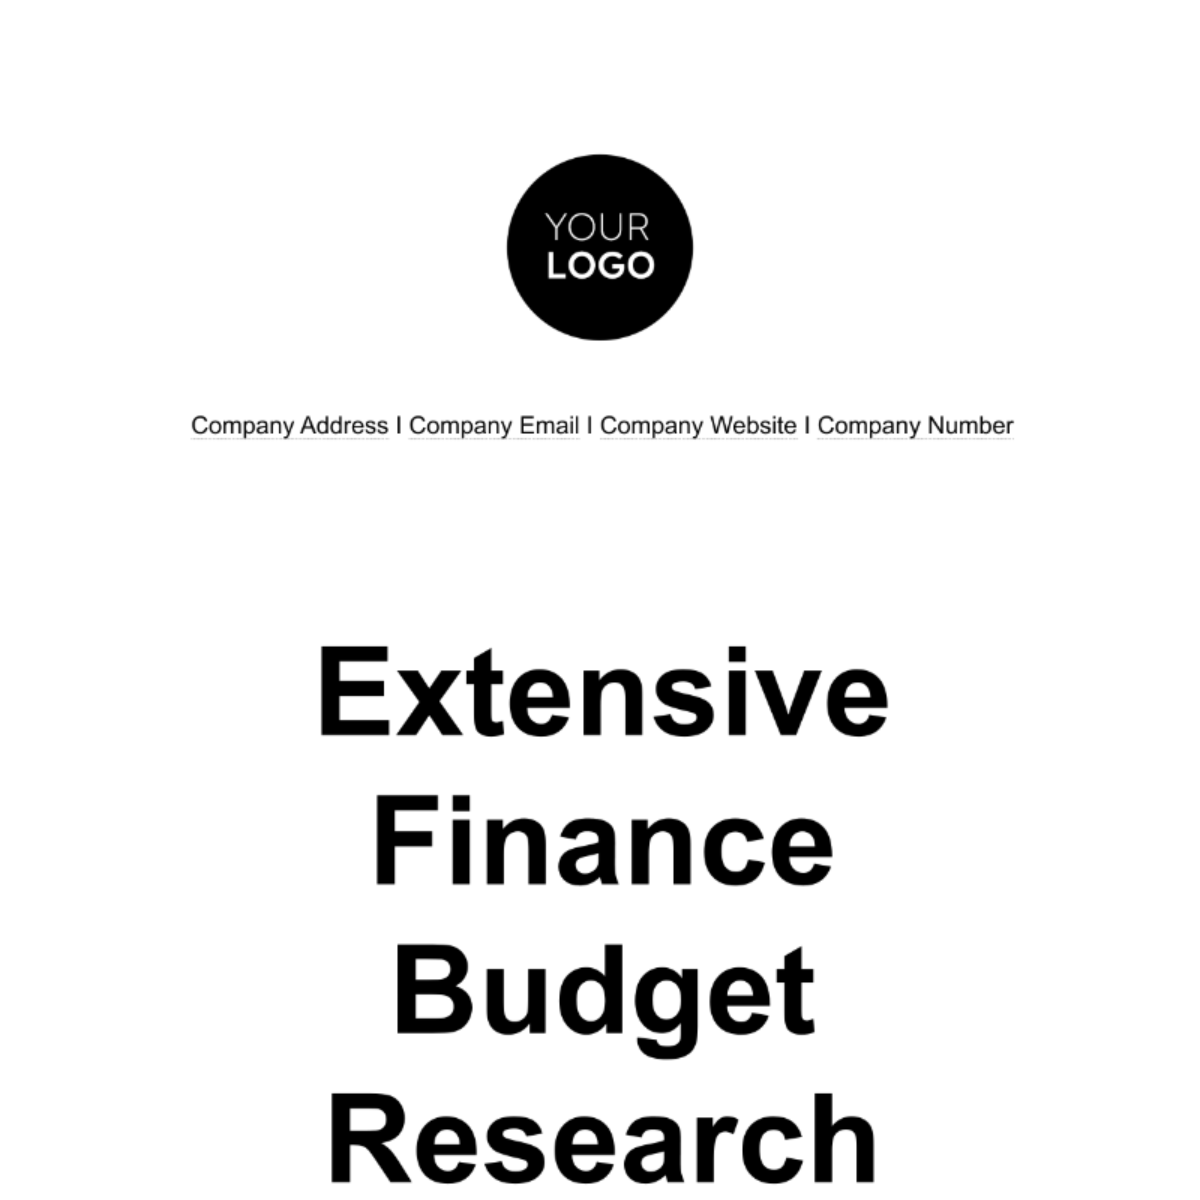 Free Extensive Finance Budget Research Template